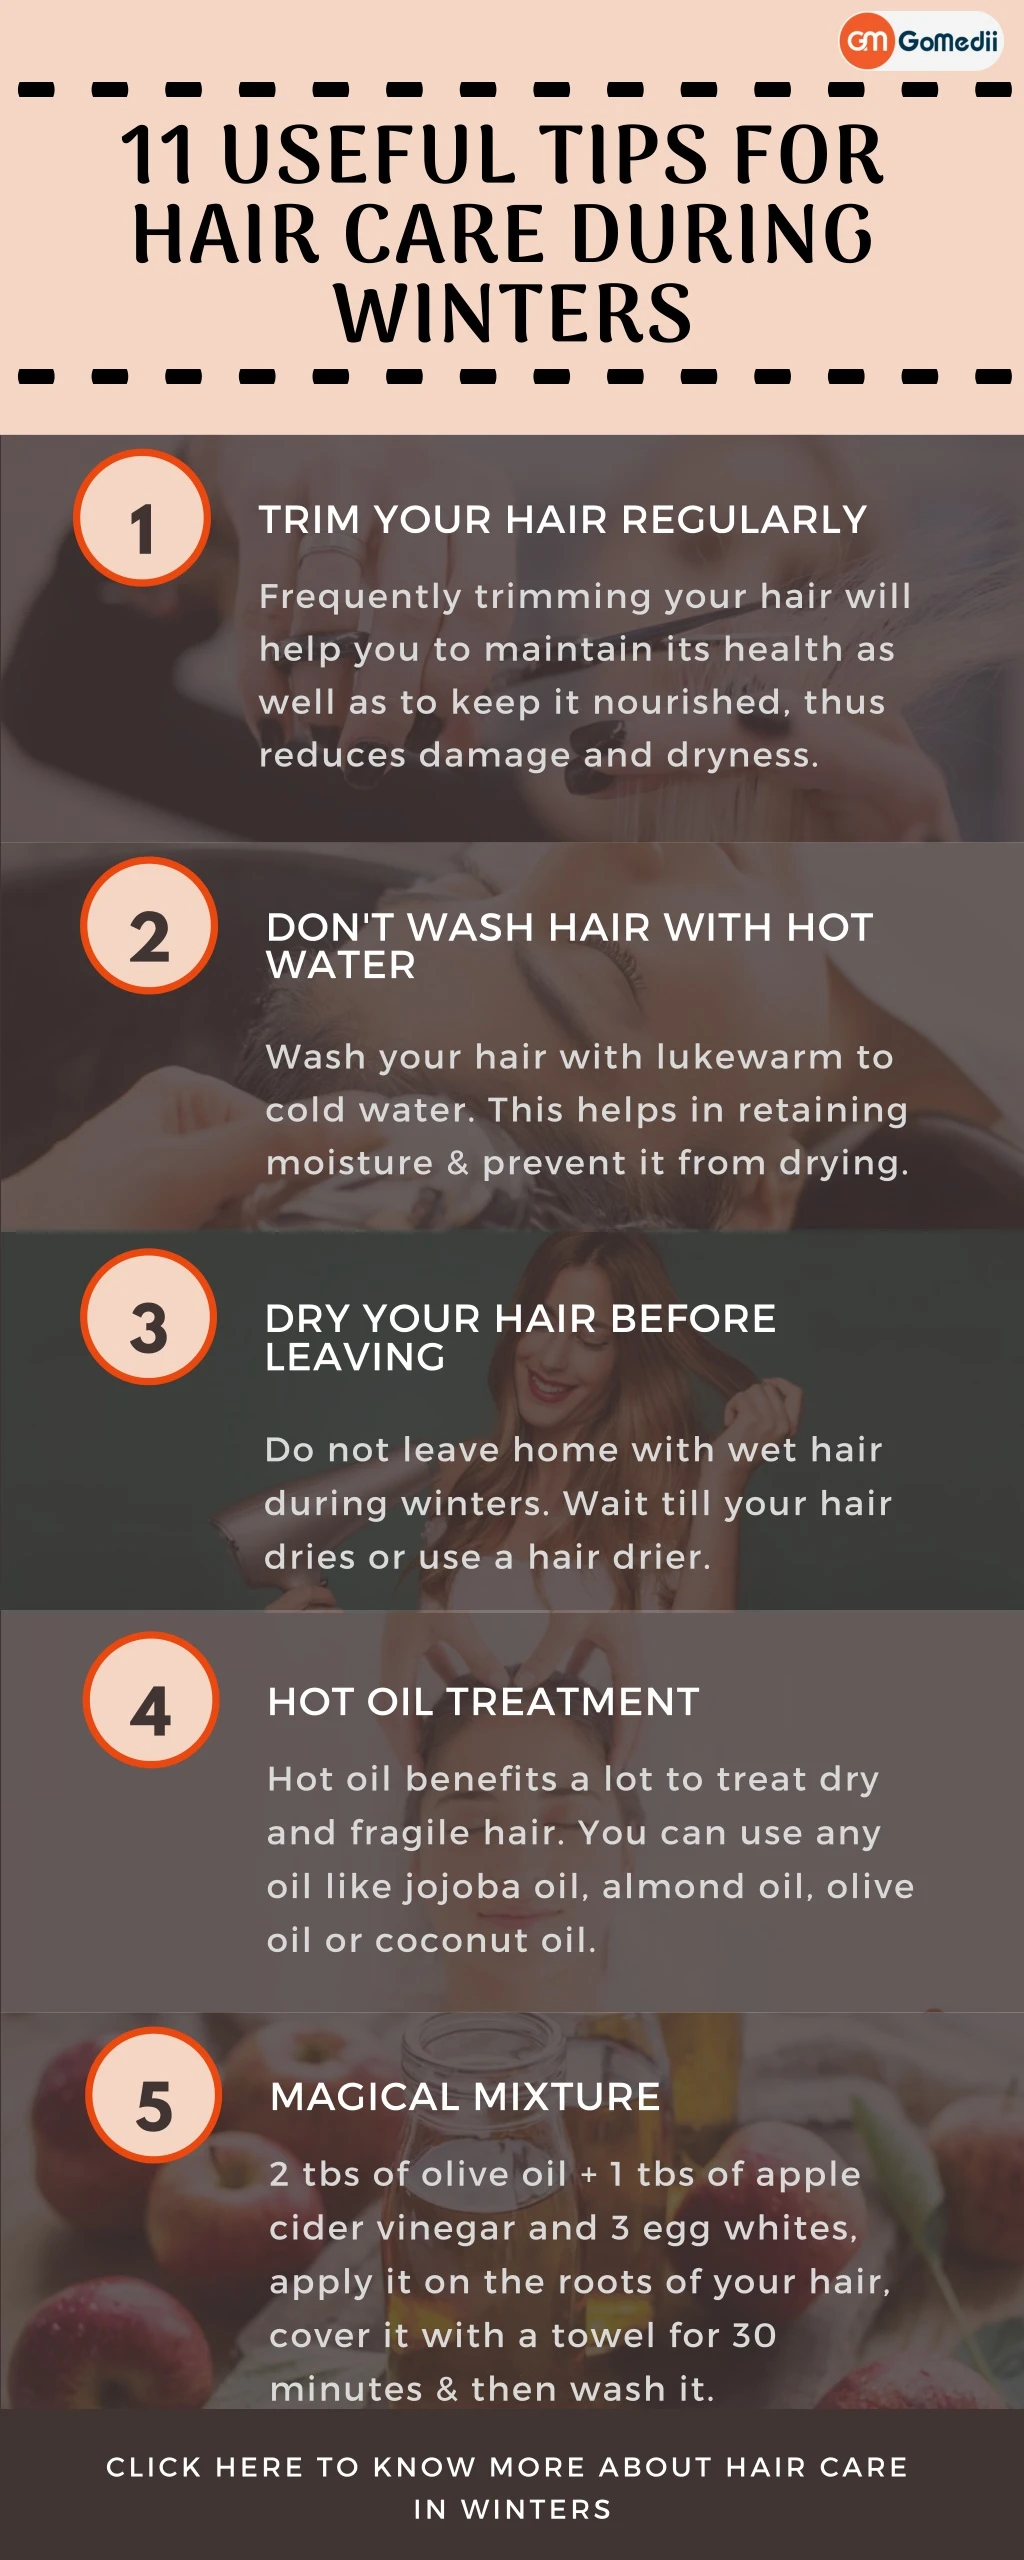 11 useful tips for hair care during winters